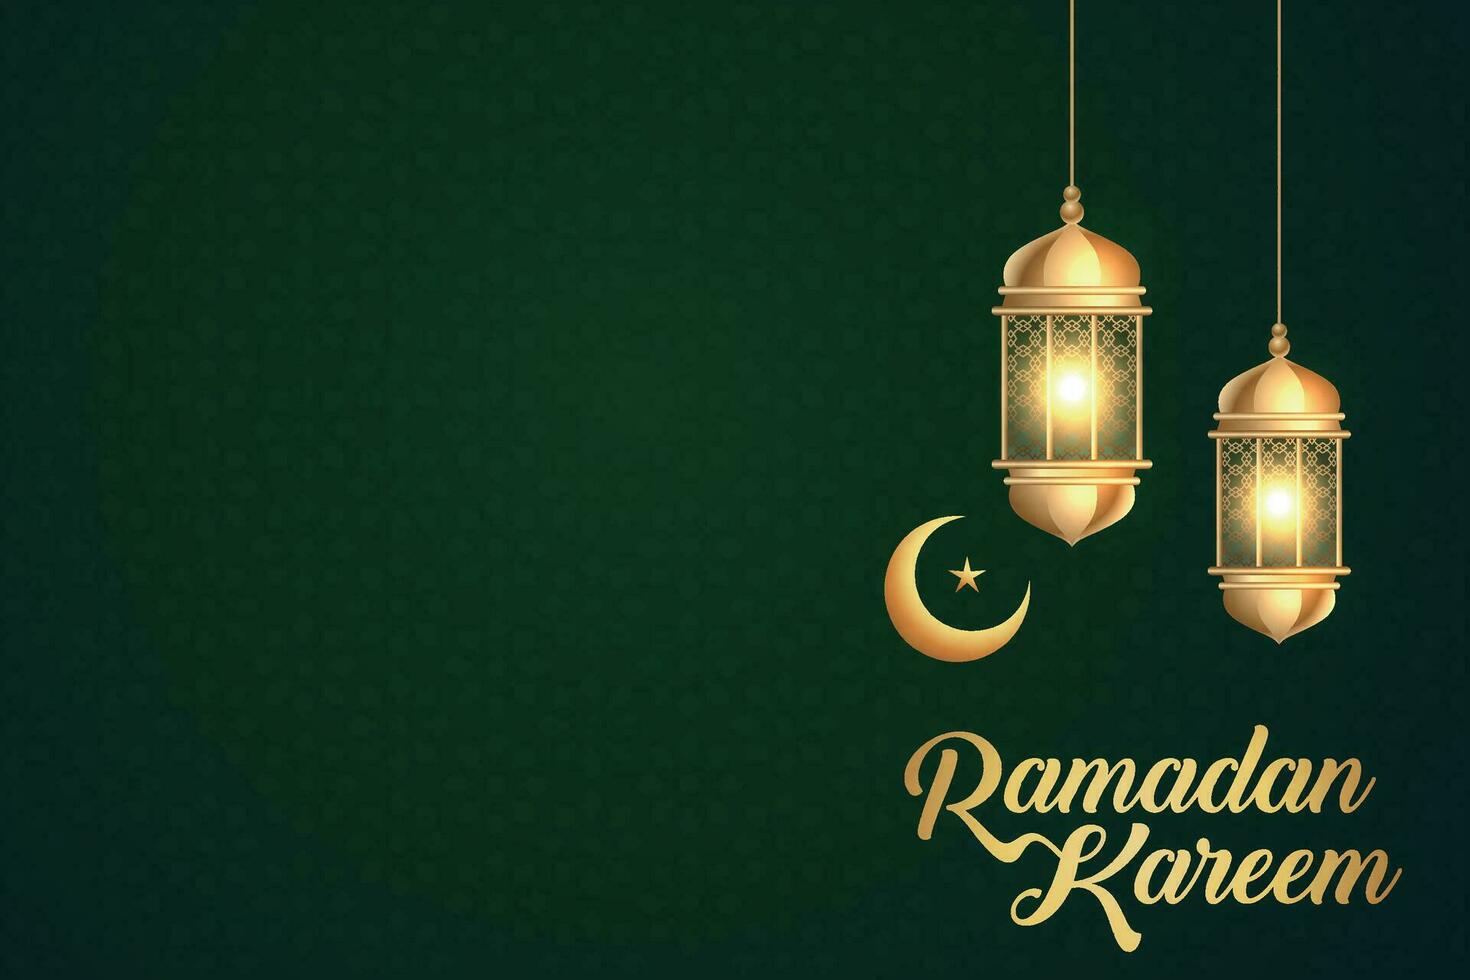 ramadan kareem greeting with lanterns and crescent on green background vector